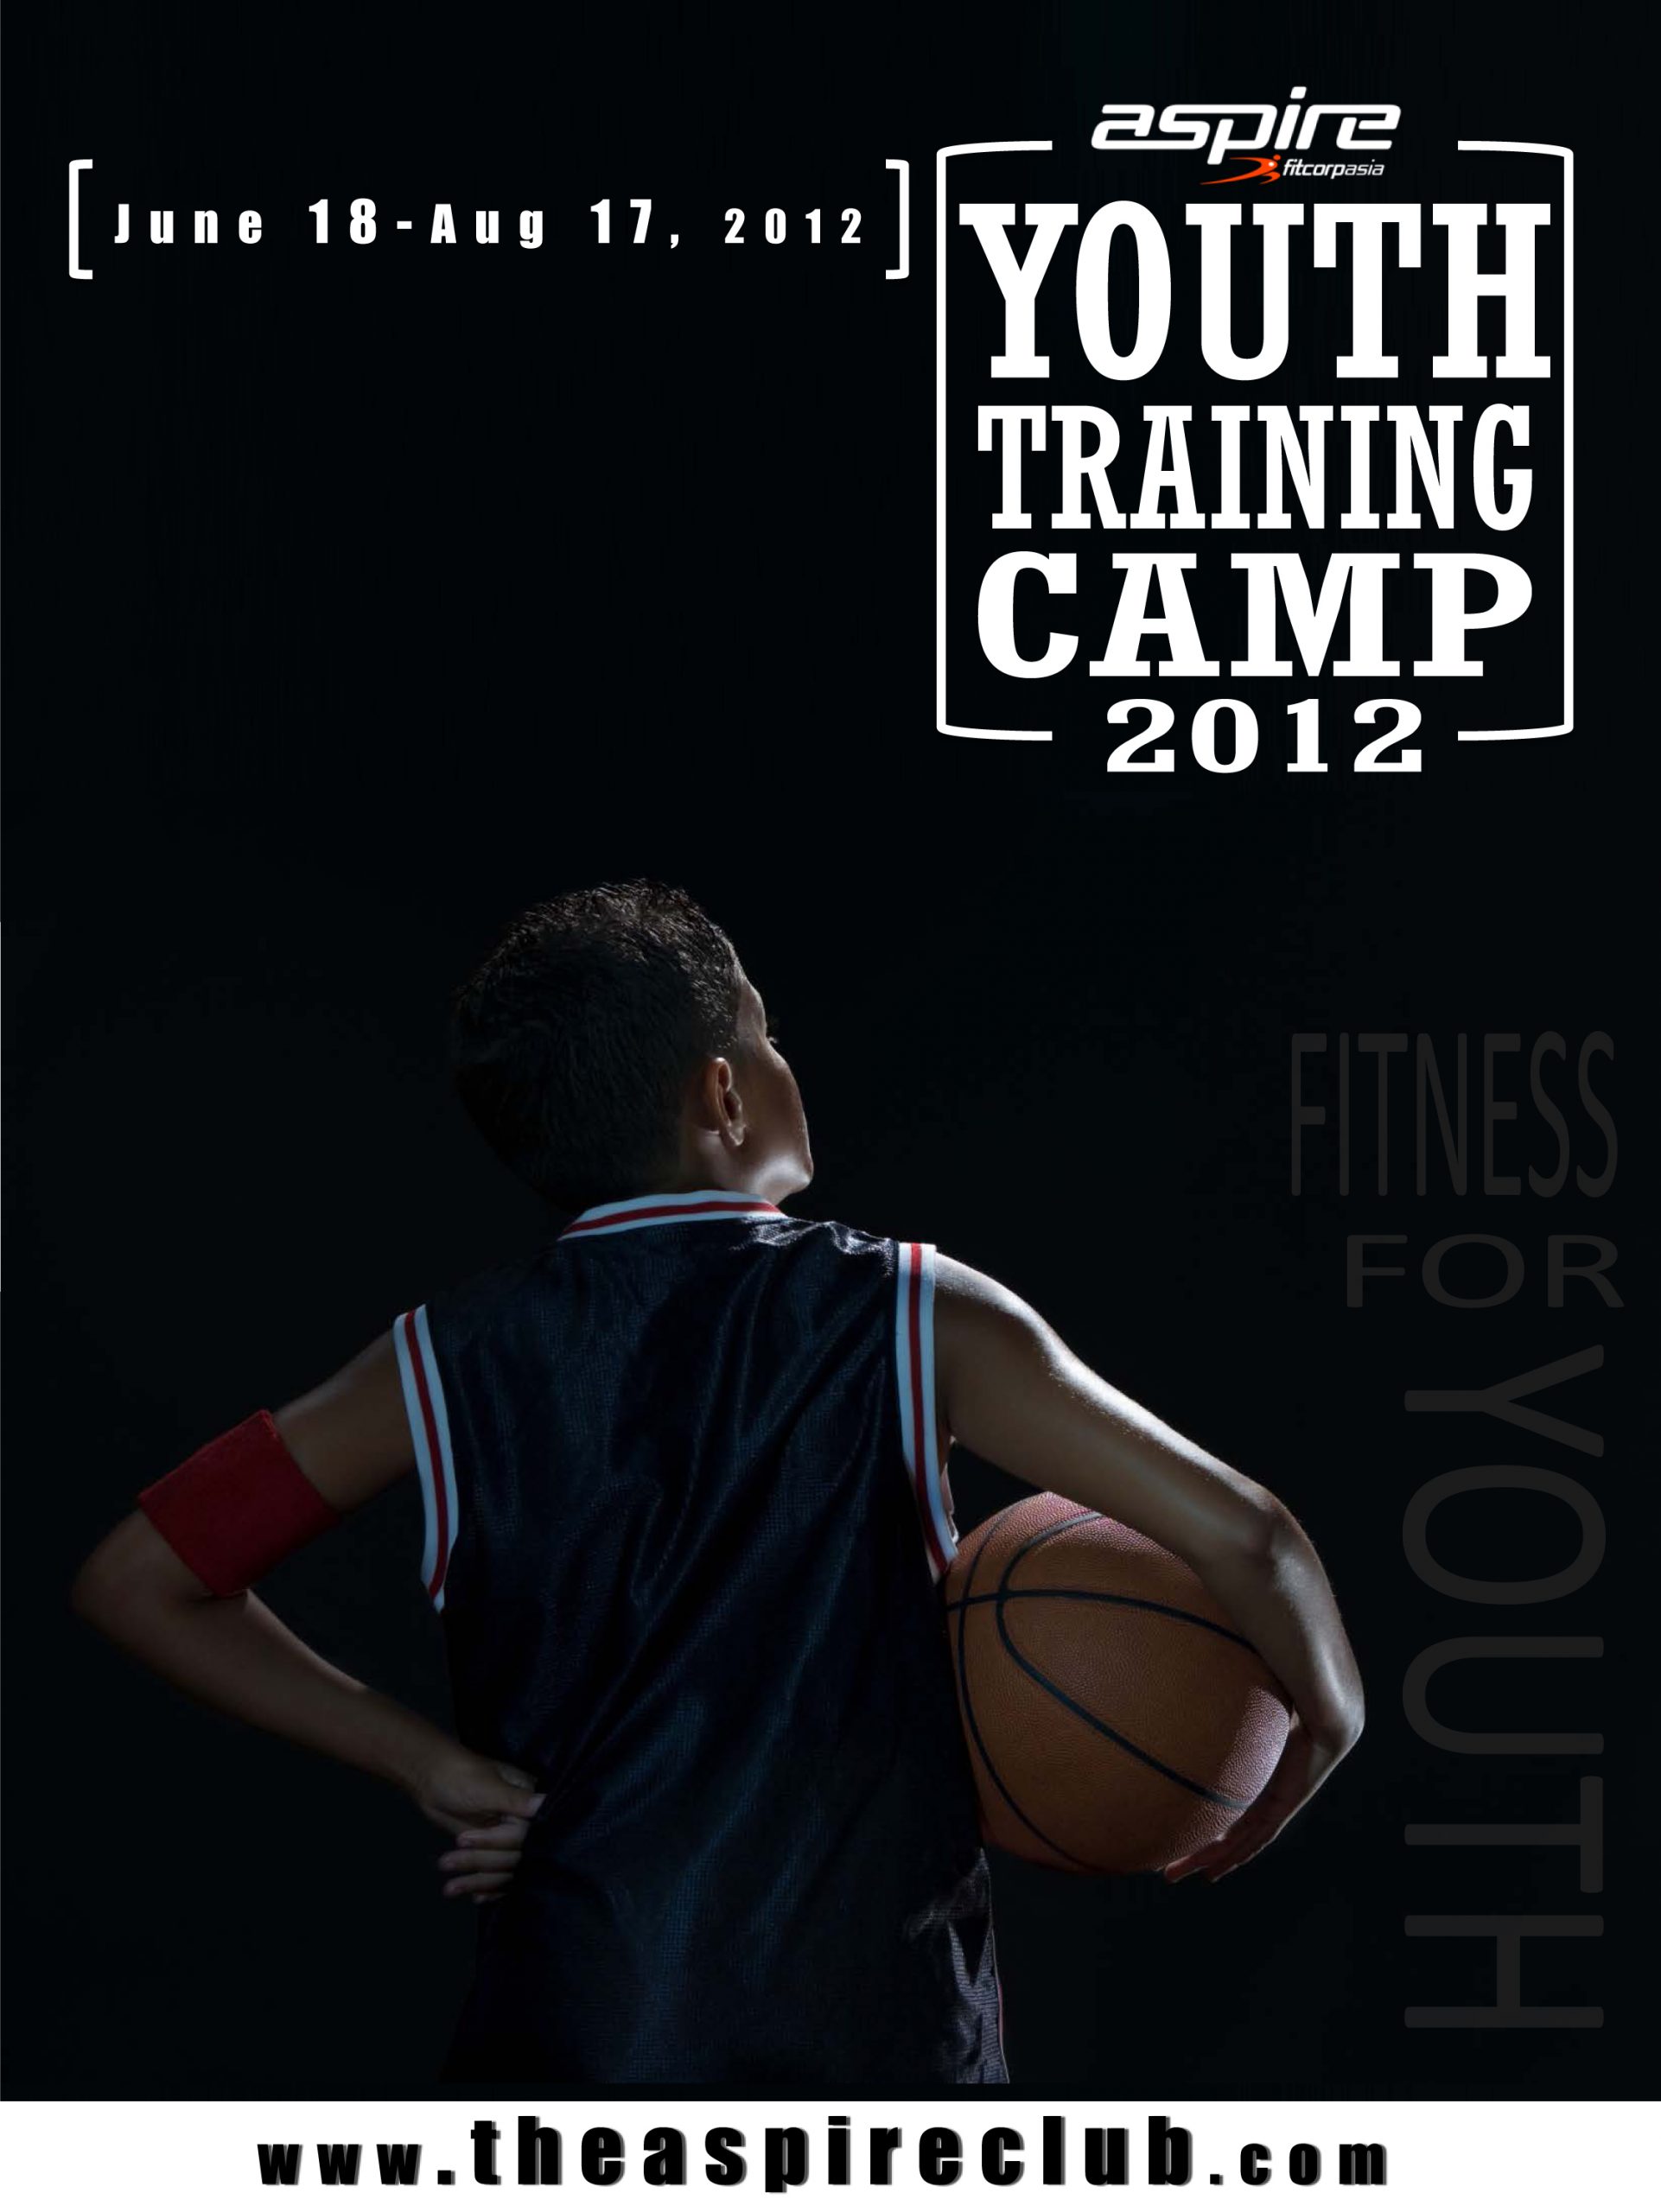 “Train your brain” at the Aspire Youth Training Camp 2012!